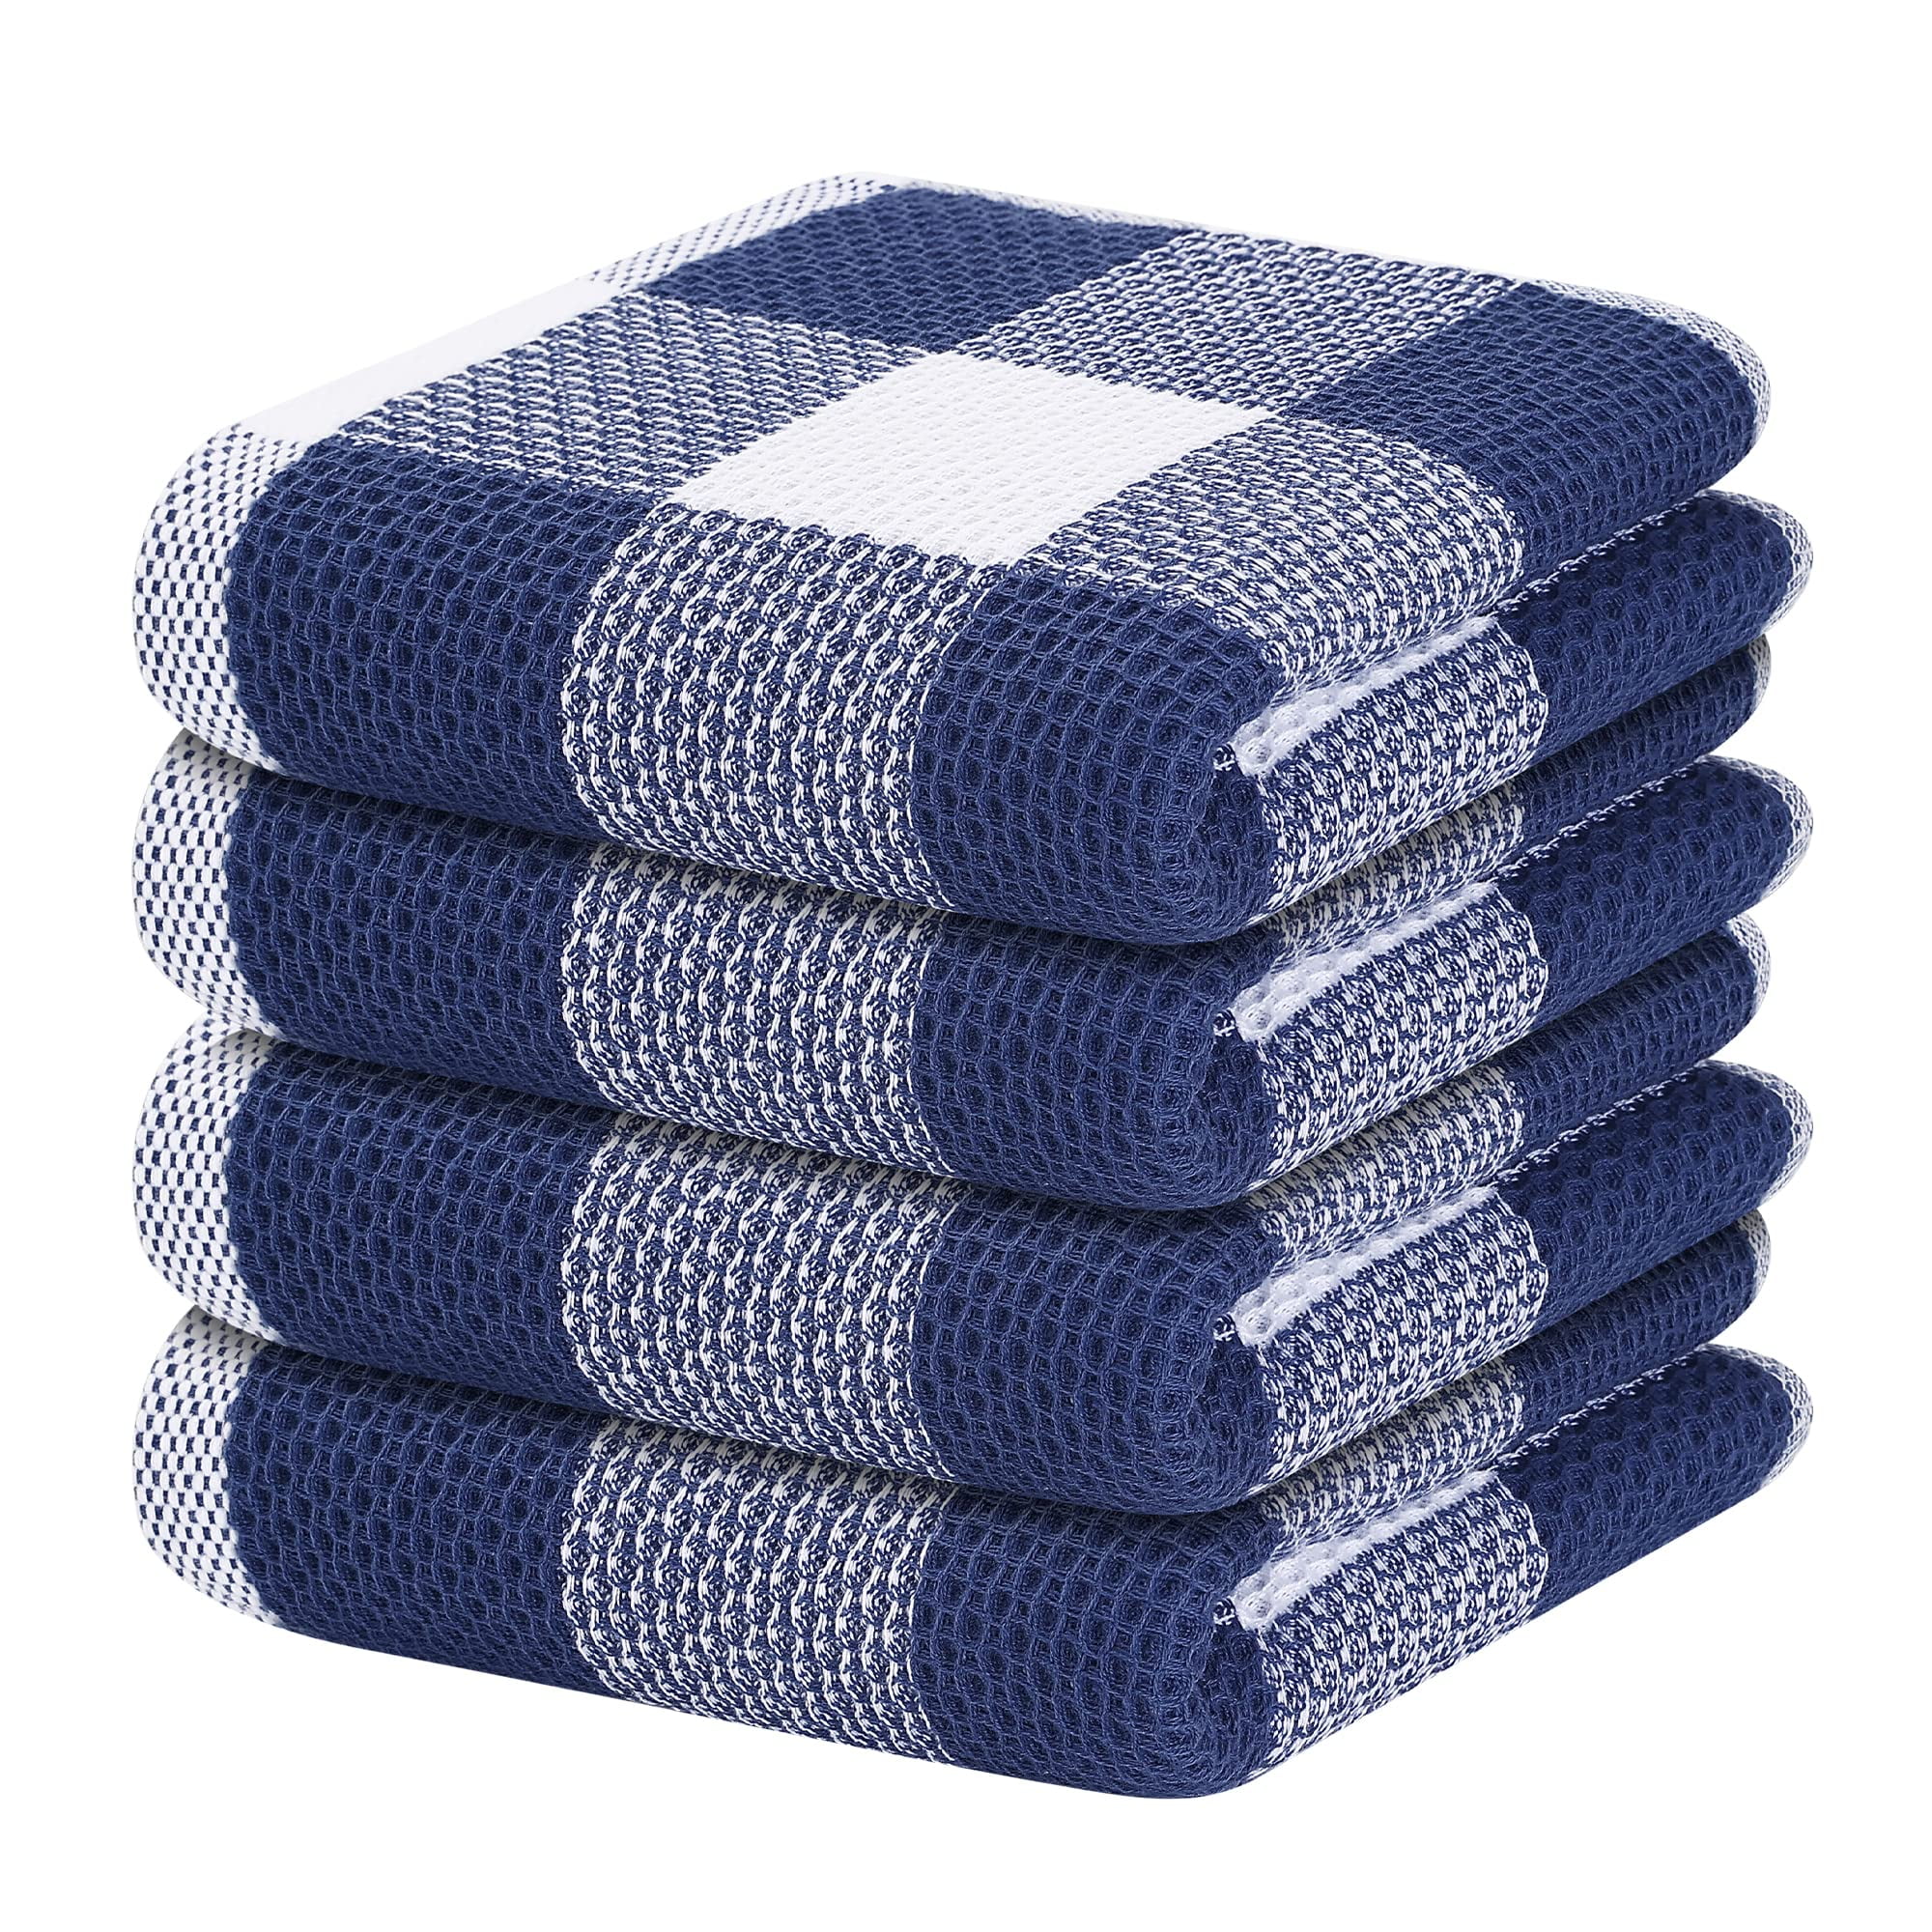 ANEWAY Kitchen Towels 100% Cotton Waffle Weave Dish Towel for Cleaning  Drying Dishes Extra Absorbent and Soft, Dish Cloth,13 x 28 in, 8 Pack